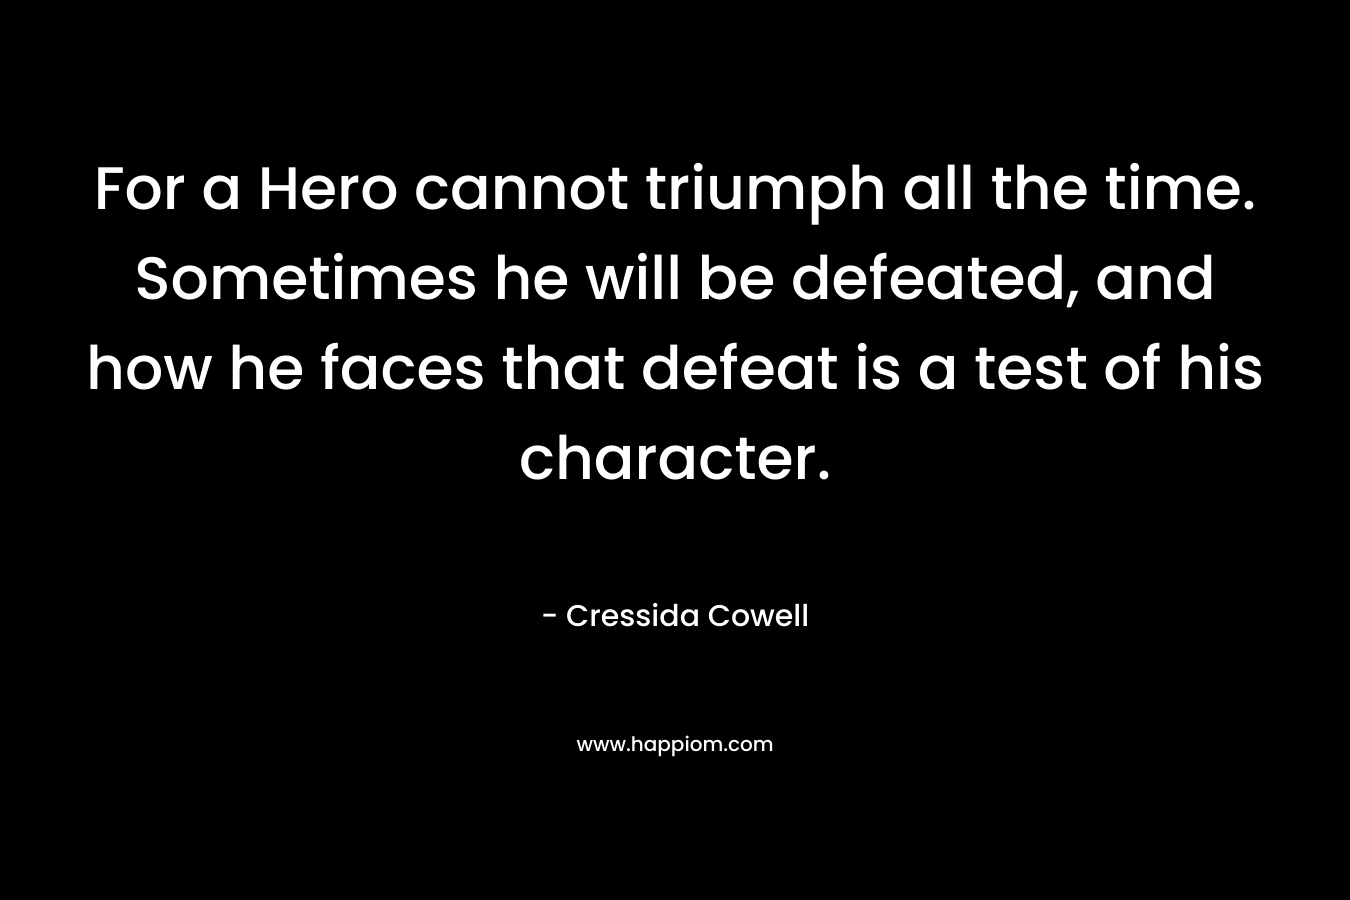 For a Hero cannot triumph all the time. Sometimes he will be defeated, and how he faces that defeat is a test of his character.